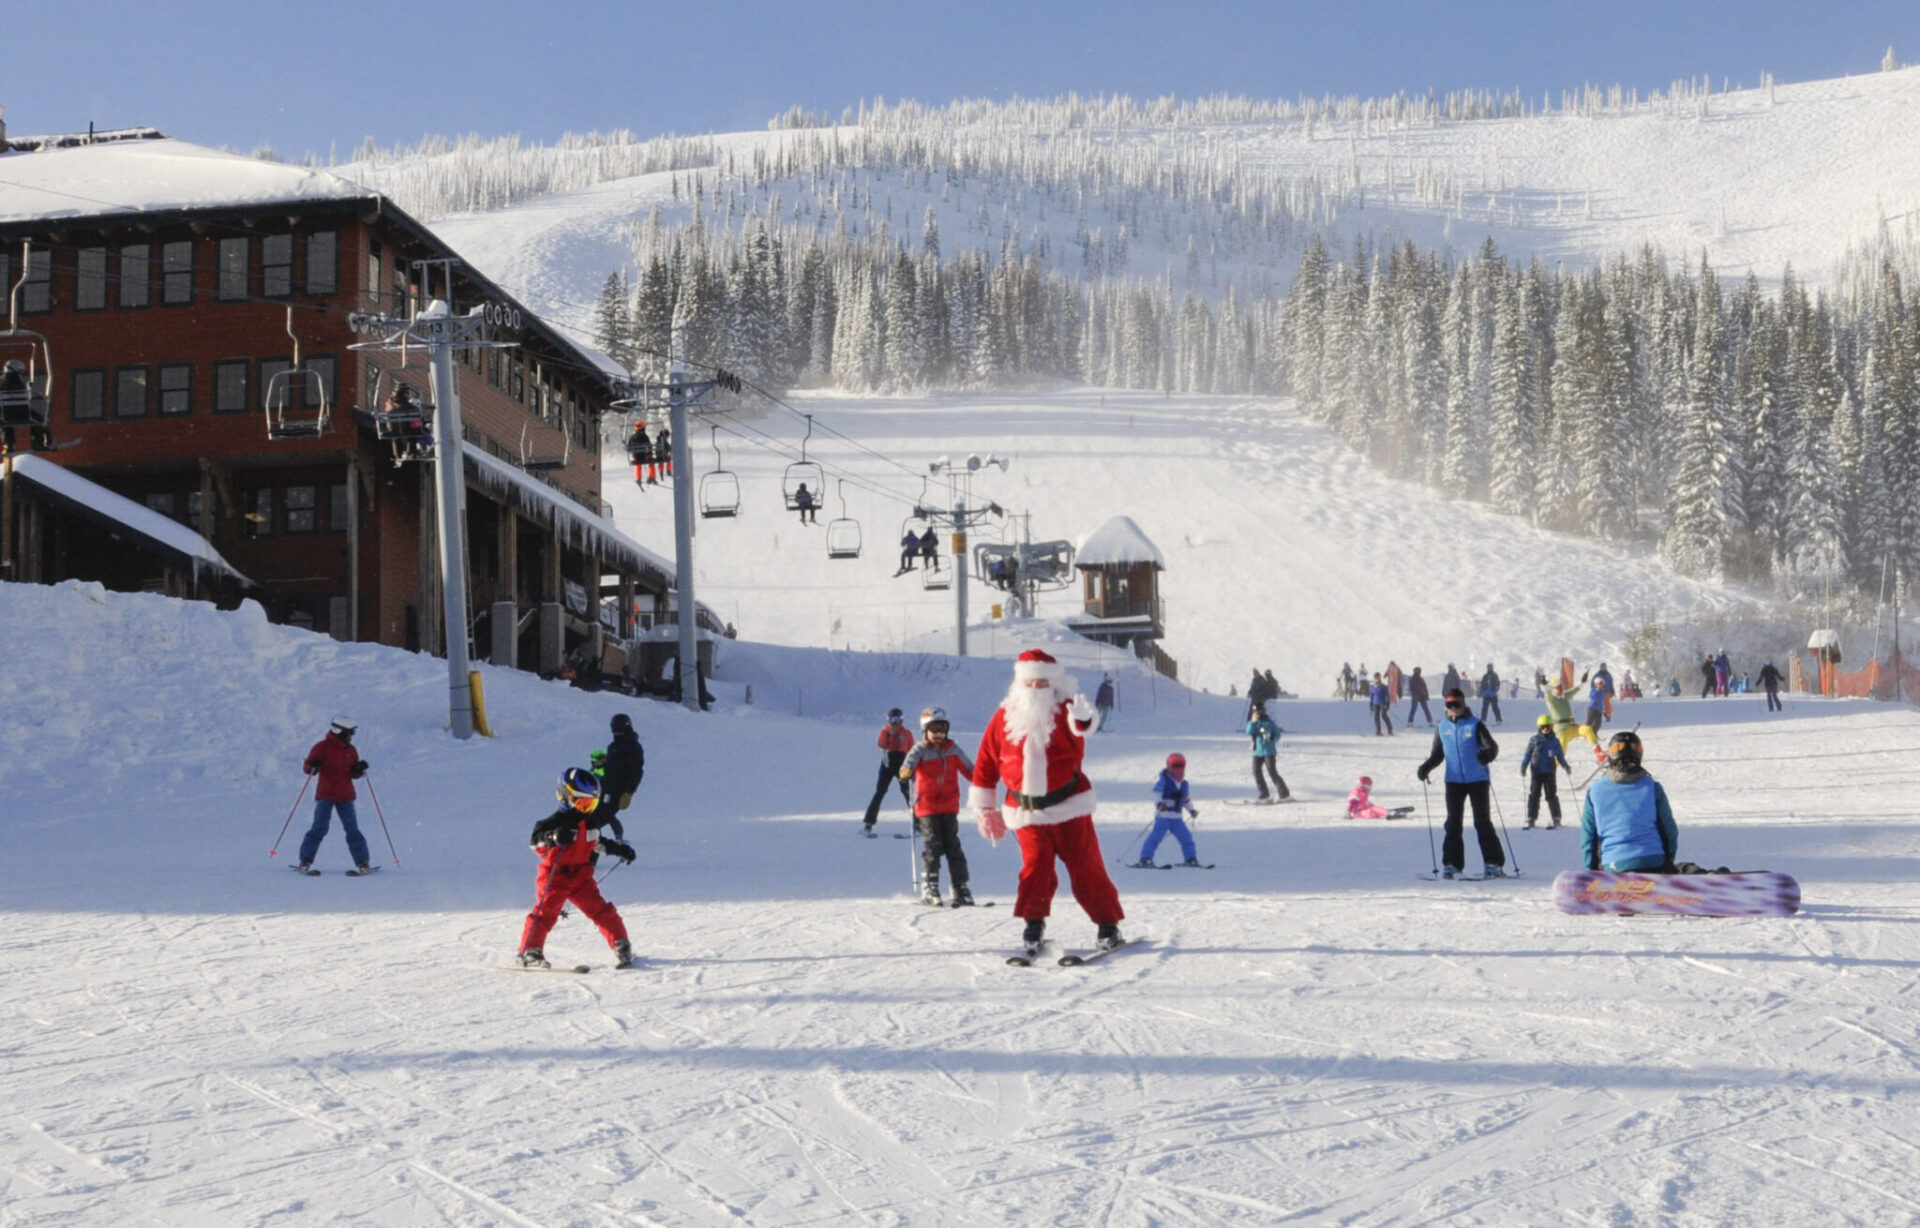 Ski-with-Santa-on-the-bunny-hill-at-Schweitzer-Mountain-photo-courtesy-Schweitzer-Mountain-Resort-scaled-scaled.jpg